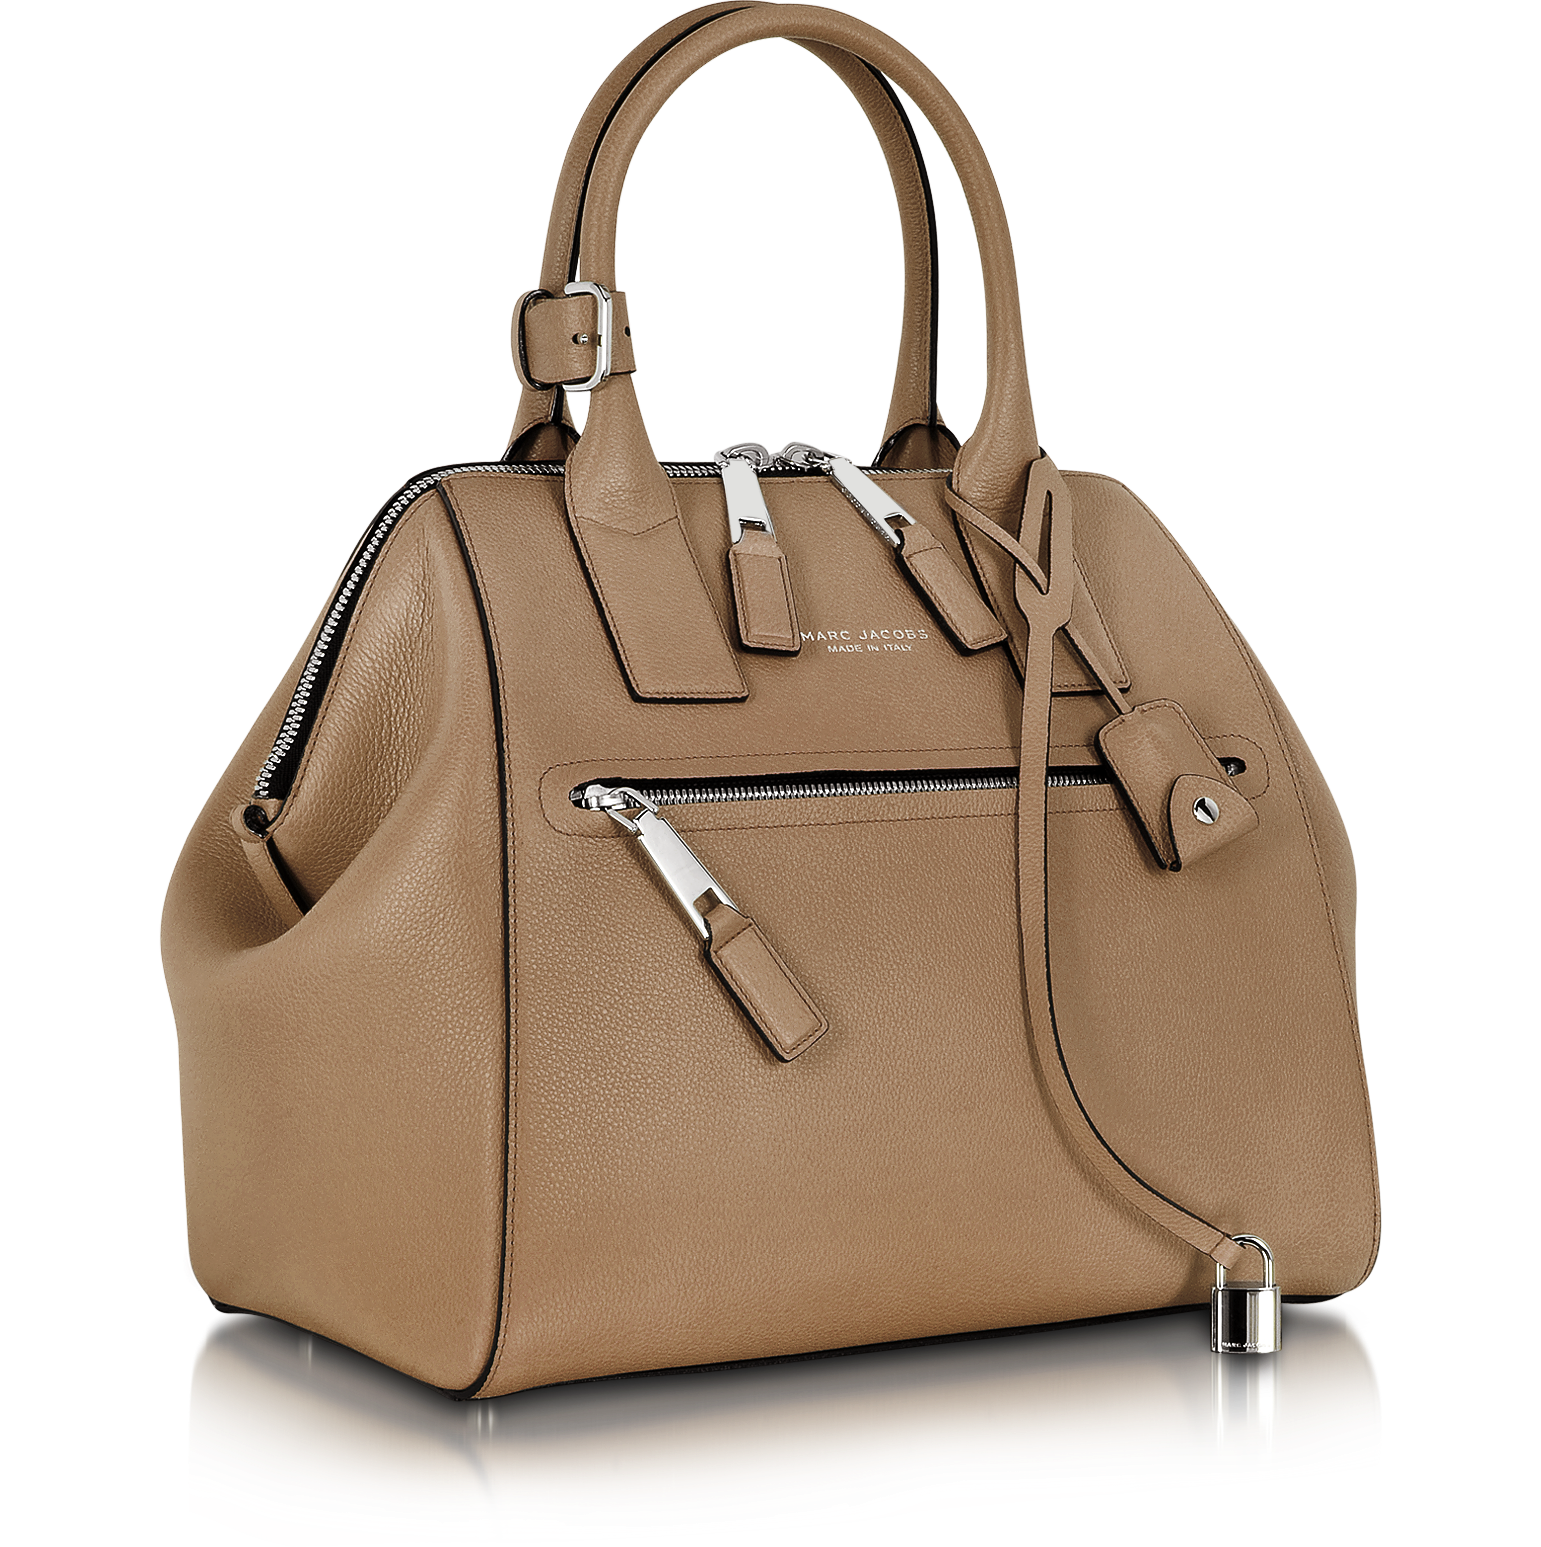 Marc Jacobs Large Incognito Brown Textured Leather Tote Bag at FORZIERI